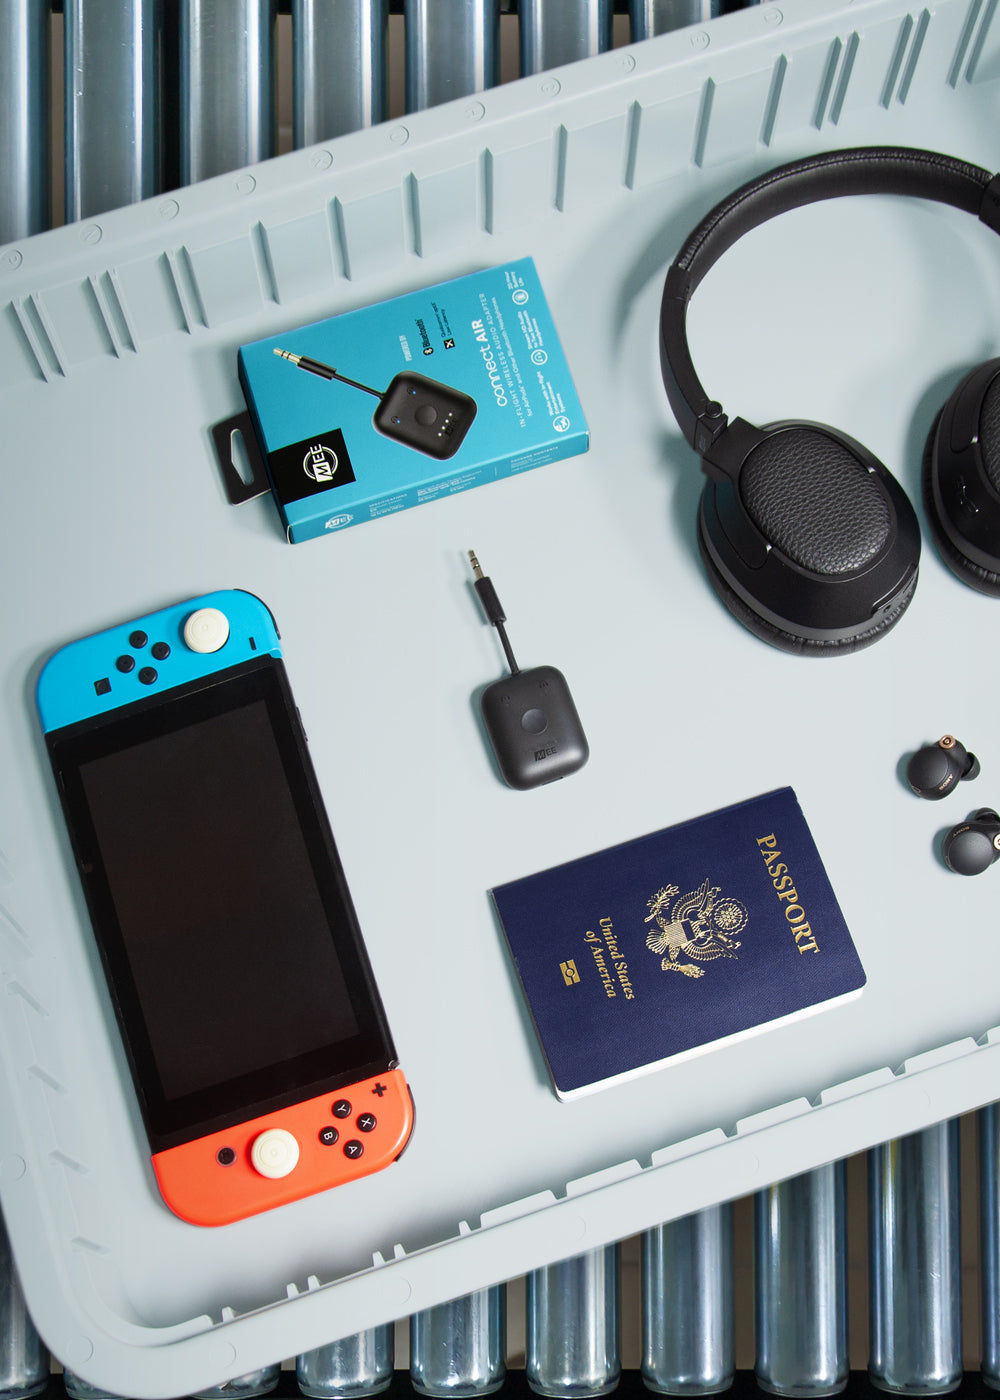 A neatly arranged travel pack on a ridged surface with a blue and orange game console, a pair of headphones, an electronic adapter kit, earbuds, and a u.s. passport.